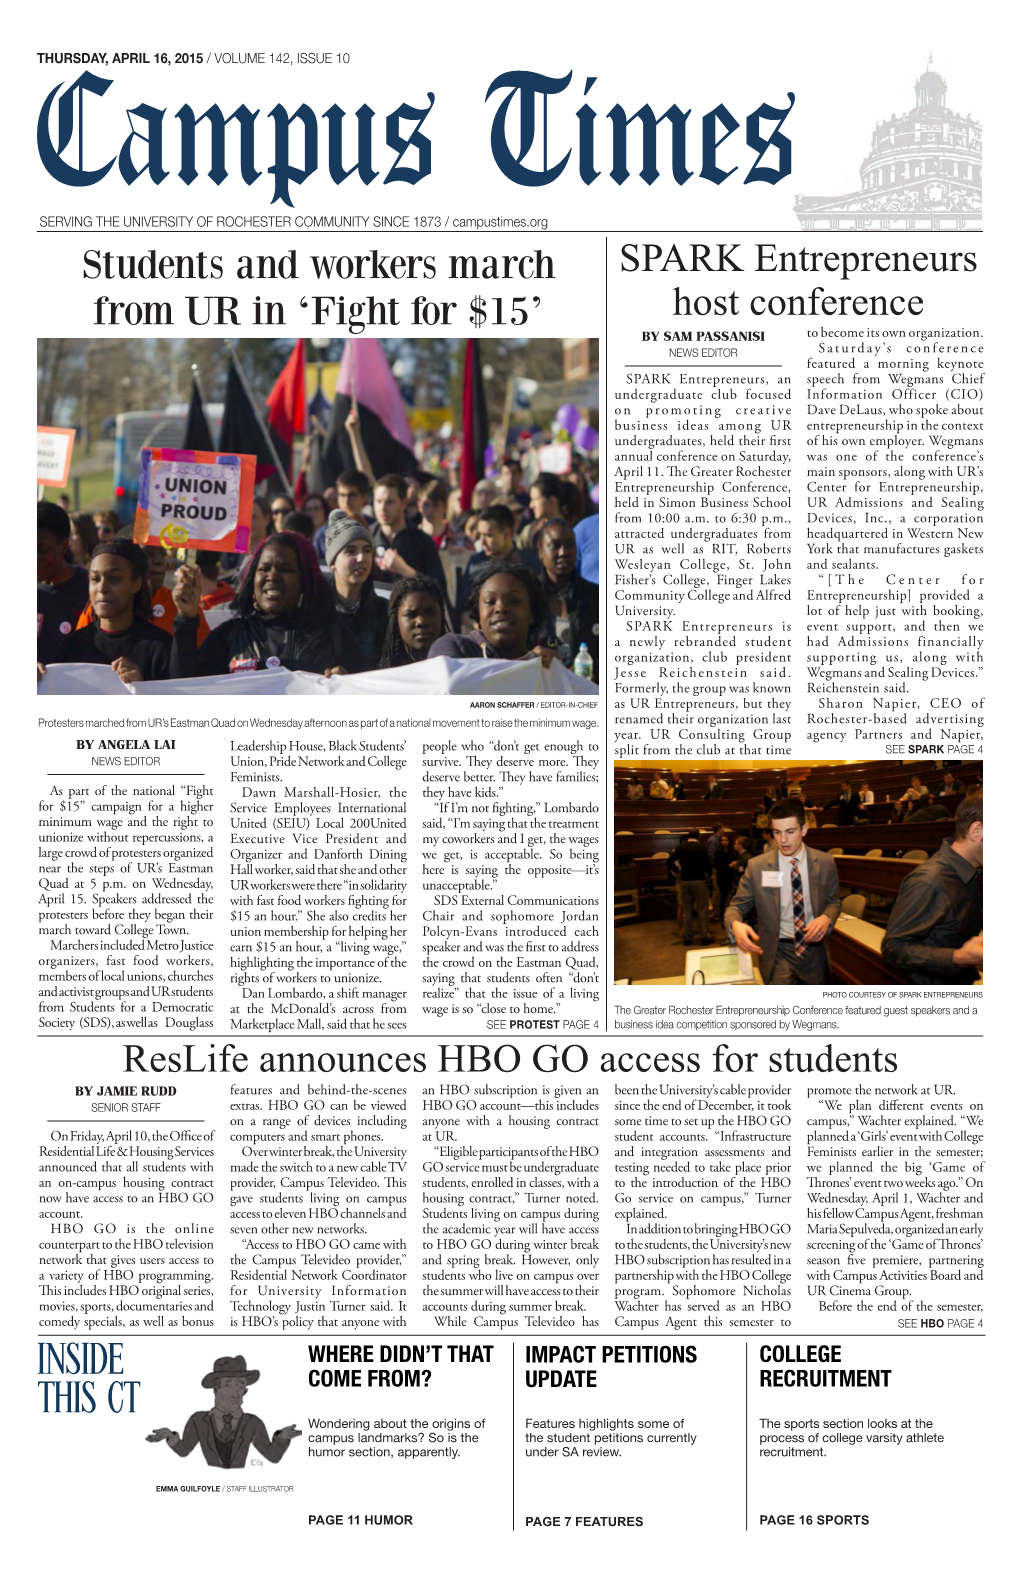 Apr 16, 2015 Issue 10